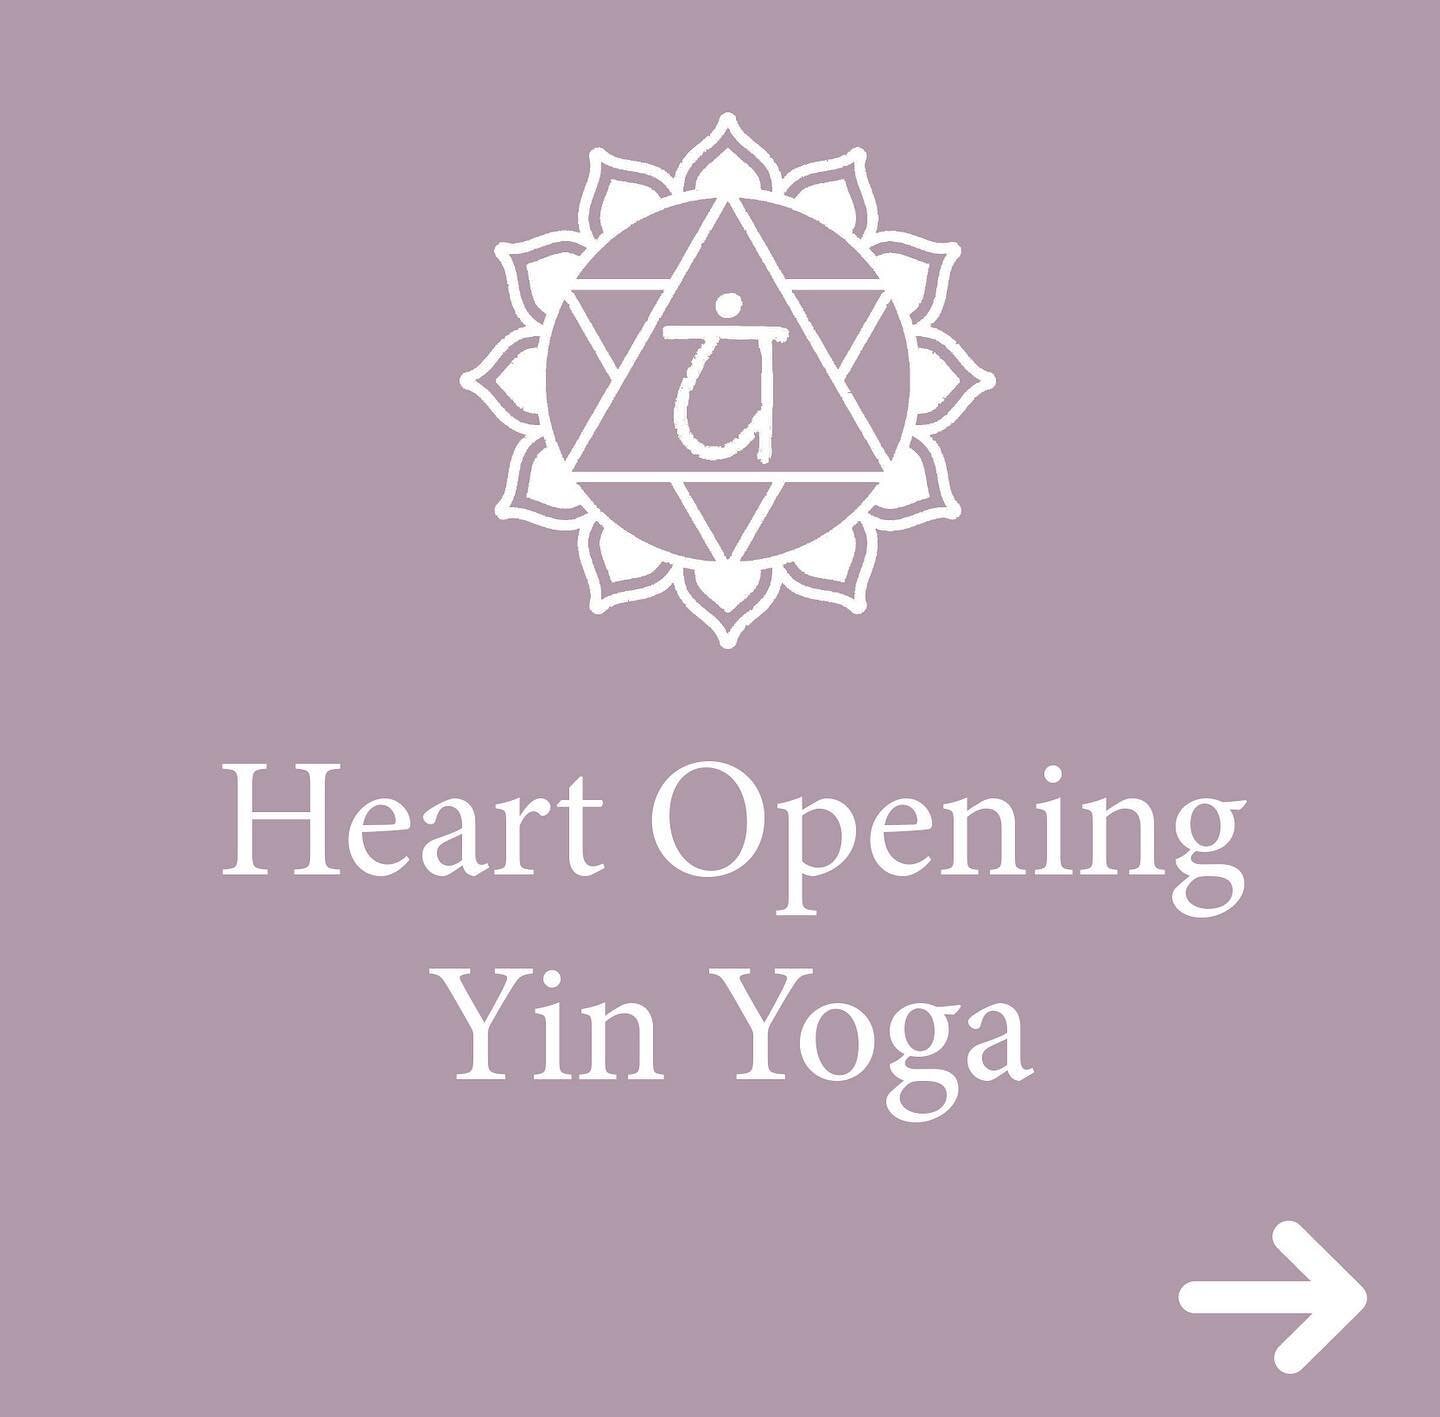 Slowly open your heart chakra with this gentle sequence - just in time for Valentine&rsquo;s Day! If short on time, I suggest still practicing: supported fish pose, melting heart pose (anahatasana), sphinx pose, and the supine twist. #snowdayyoga #se